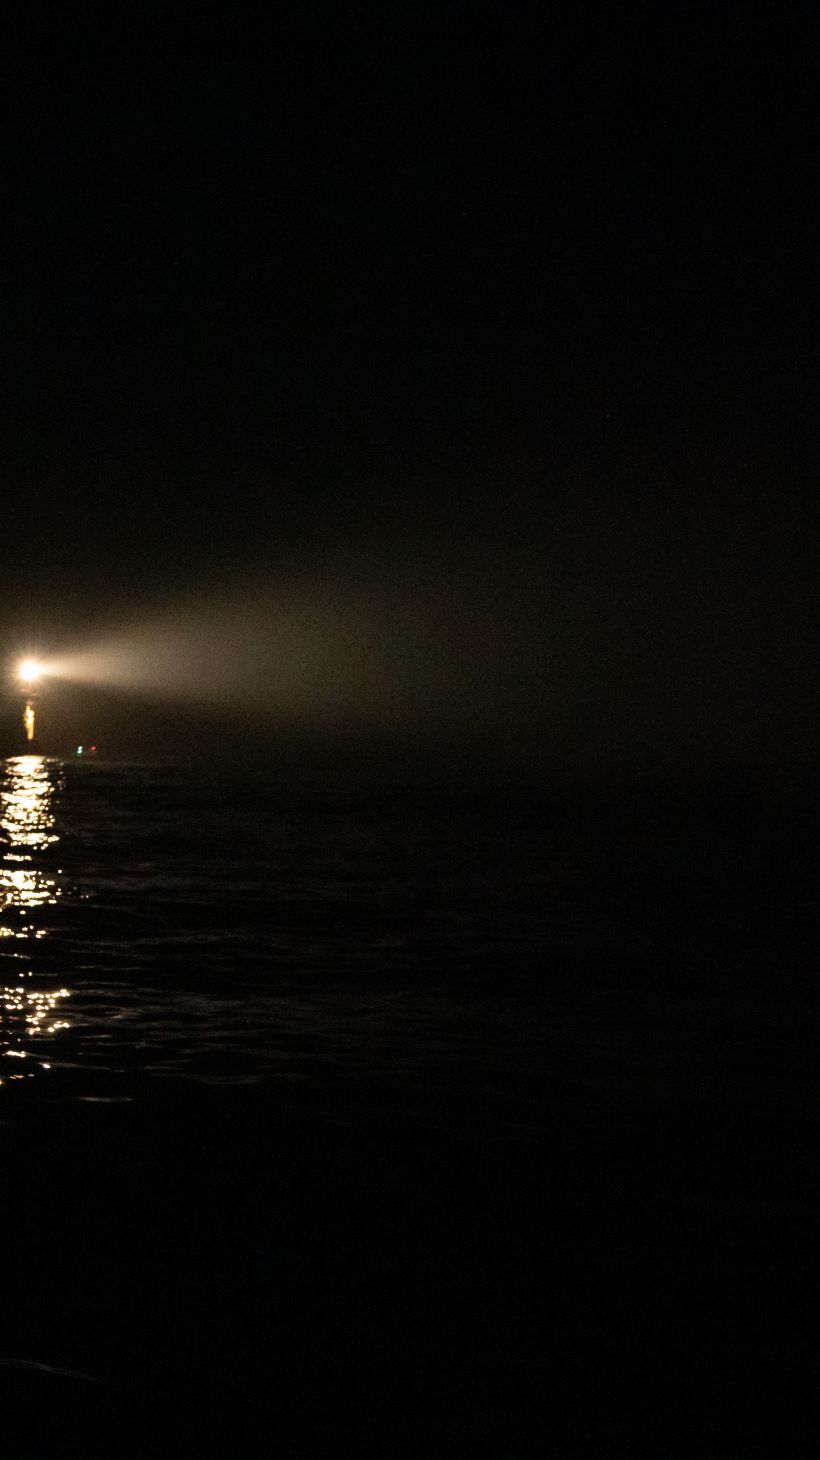 A ship's spotlight reflects on a small boat in distress